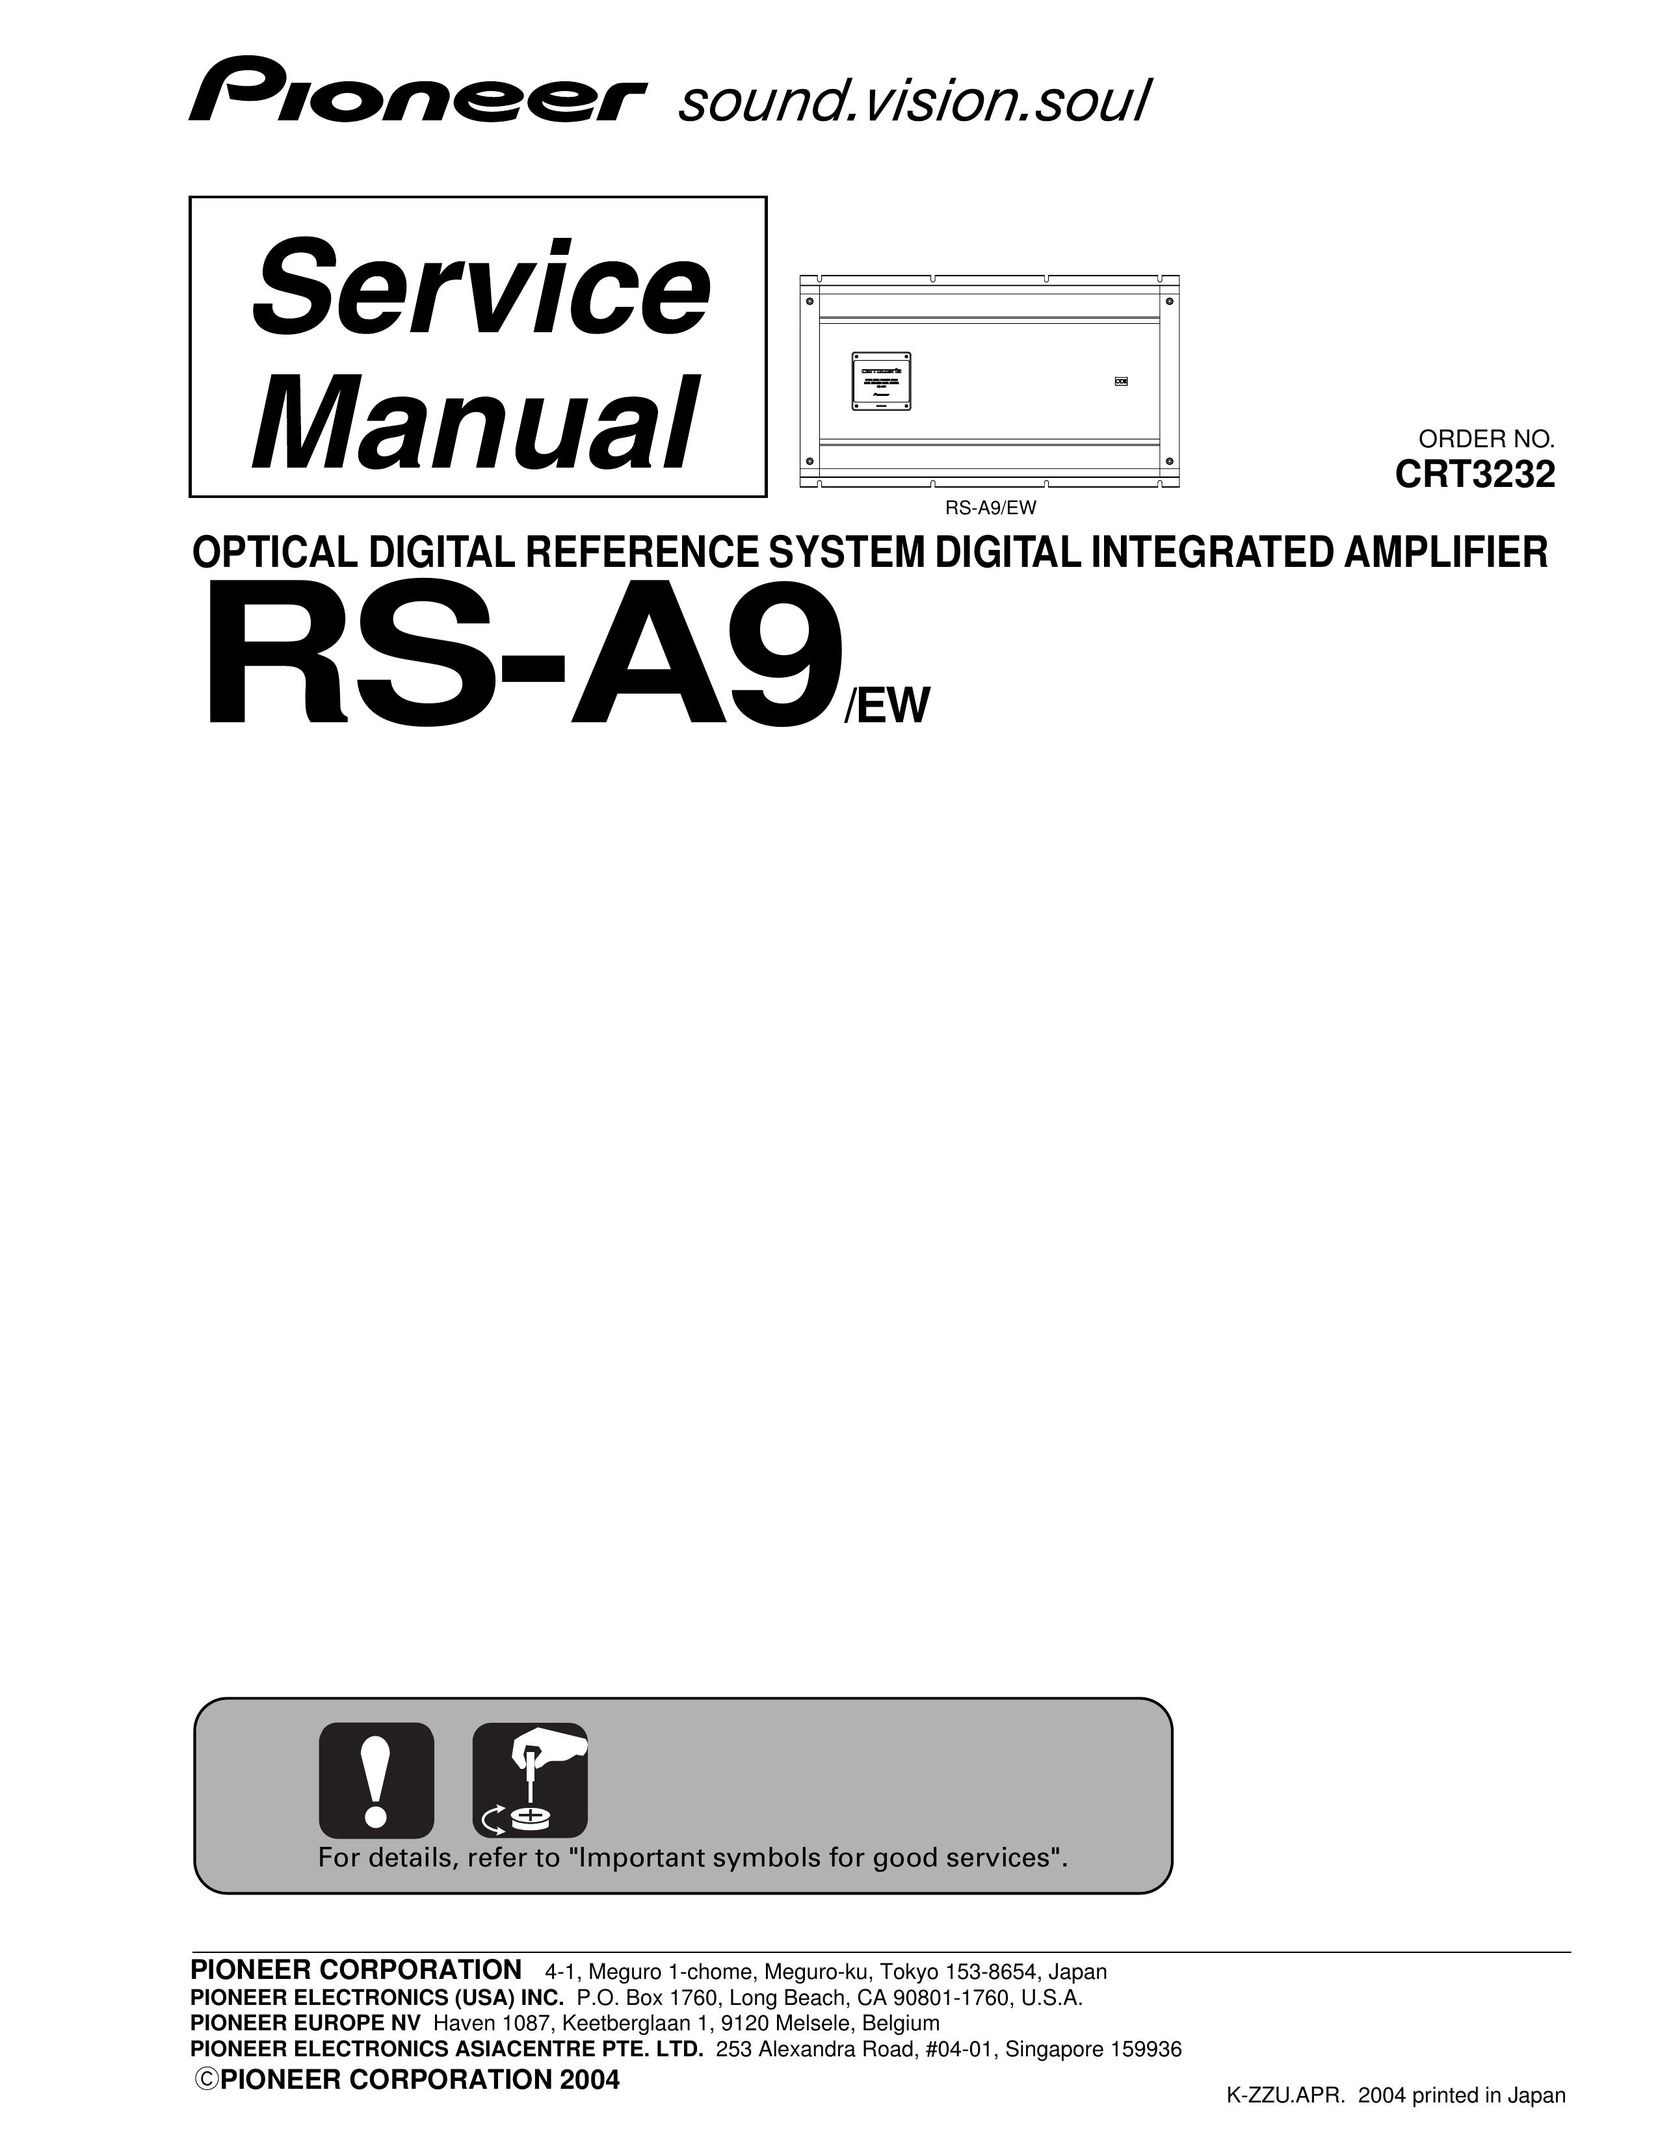 Pioneer RS-A9/EW Stereo Amplifier User Manual